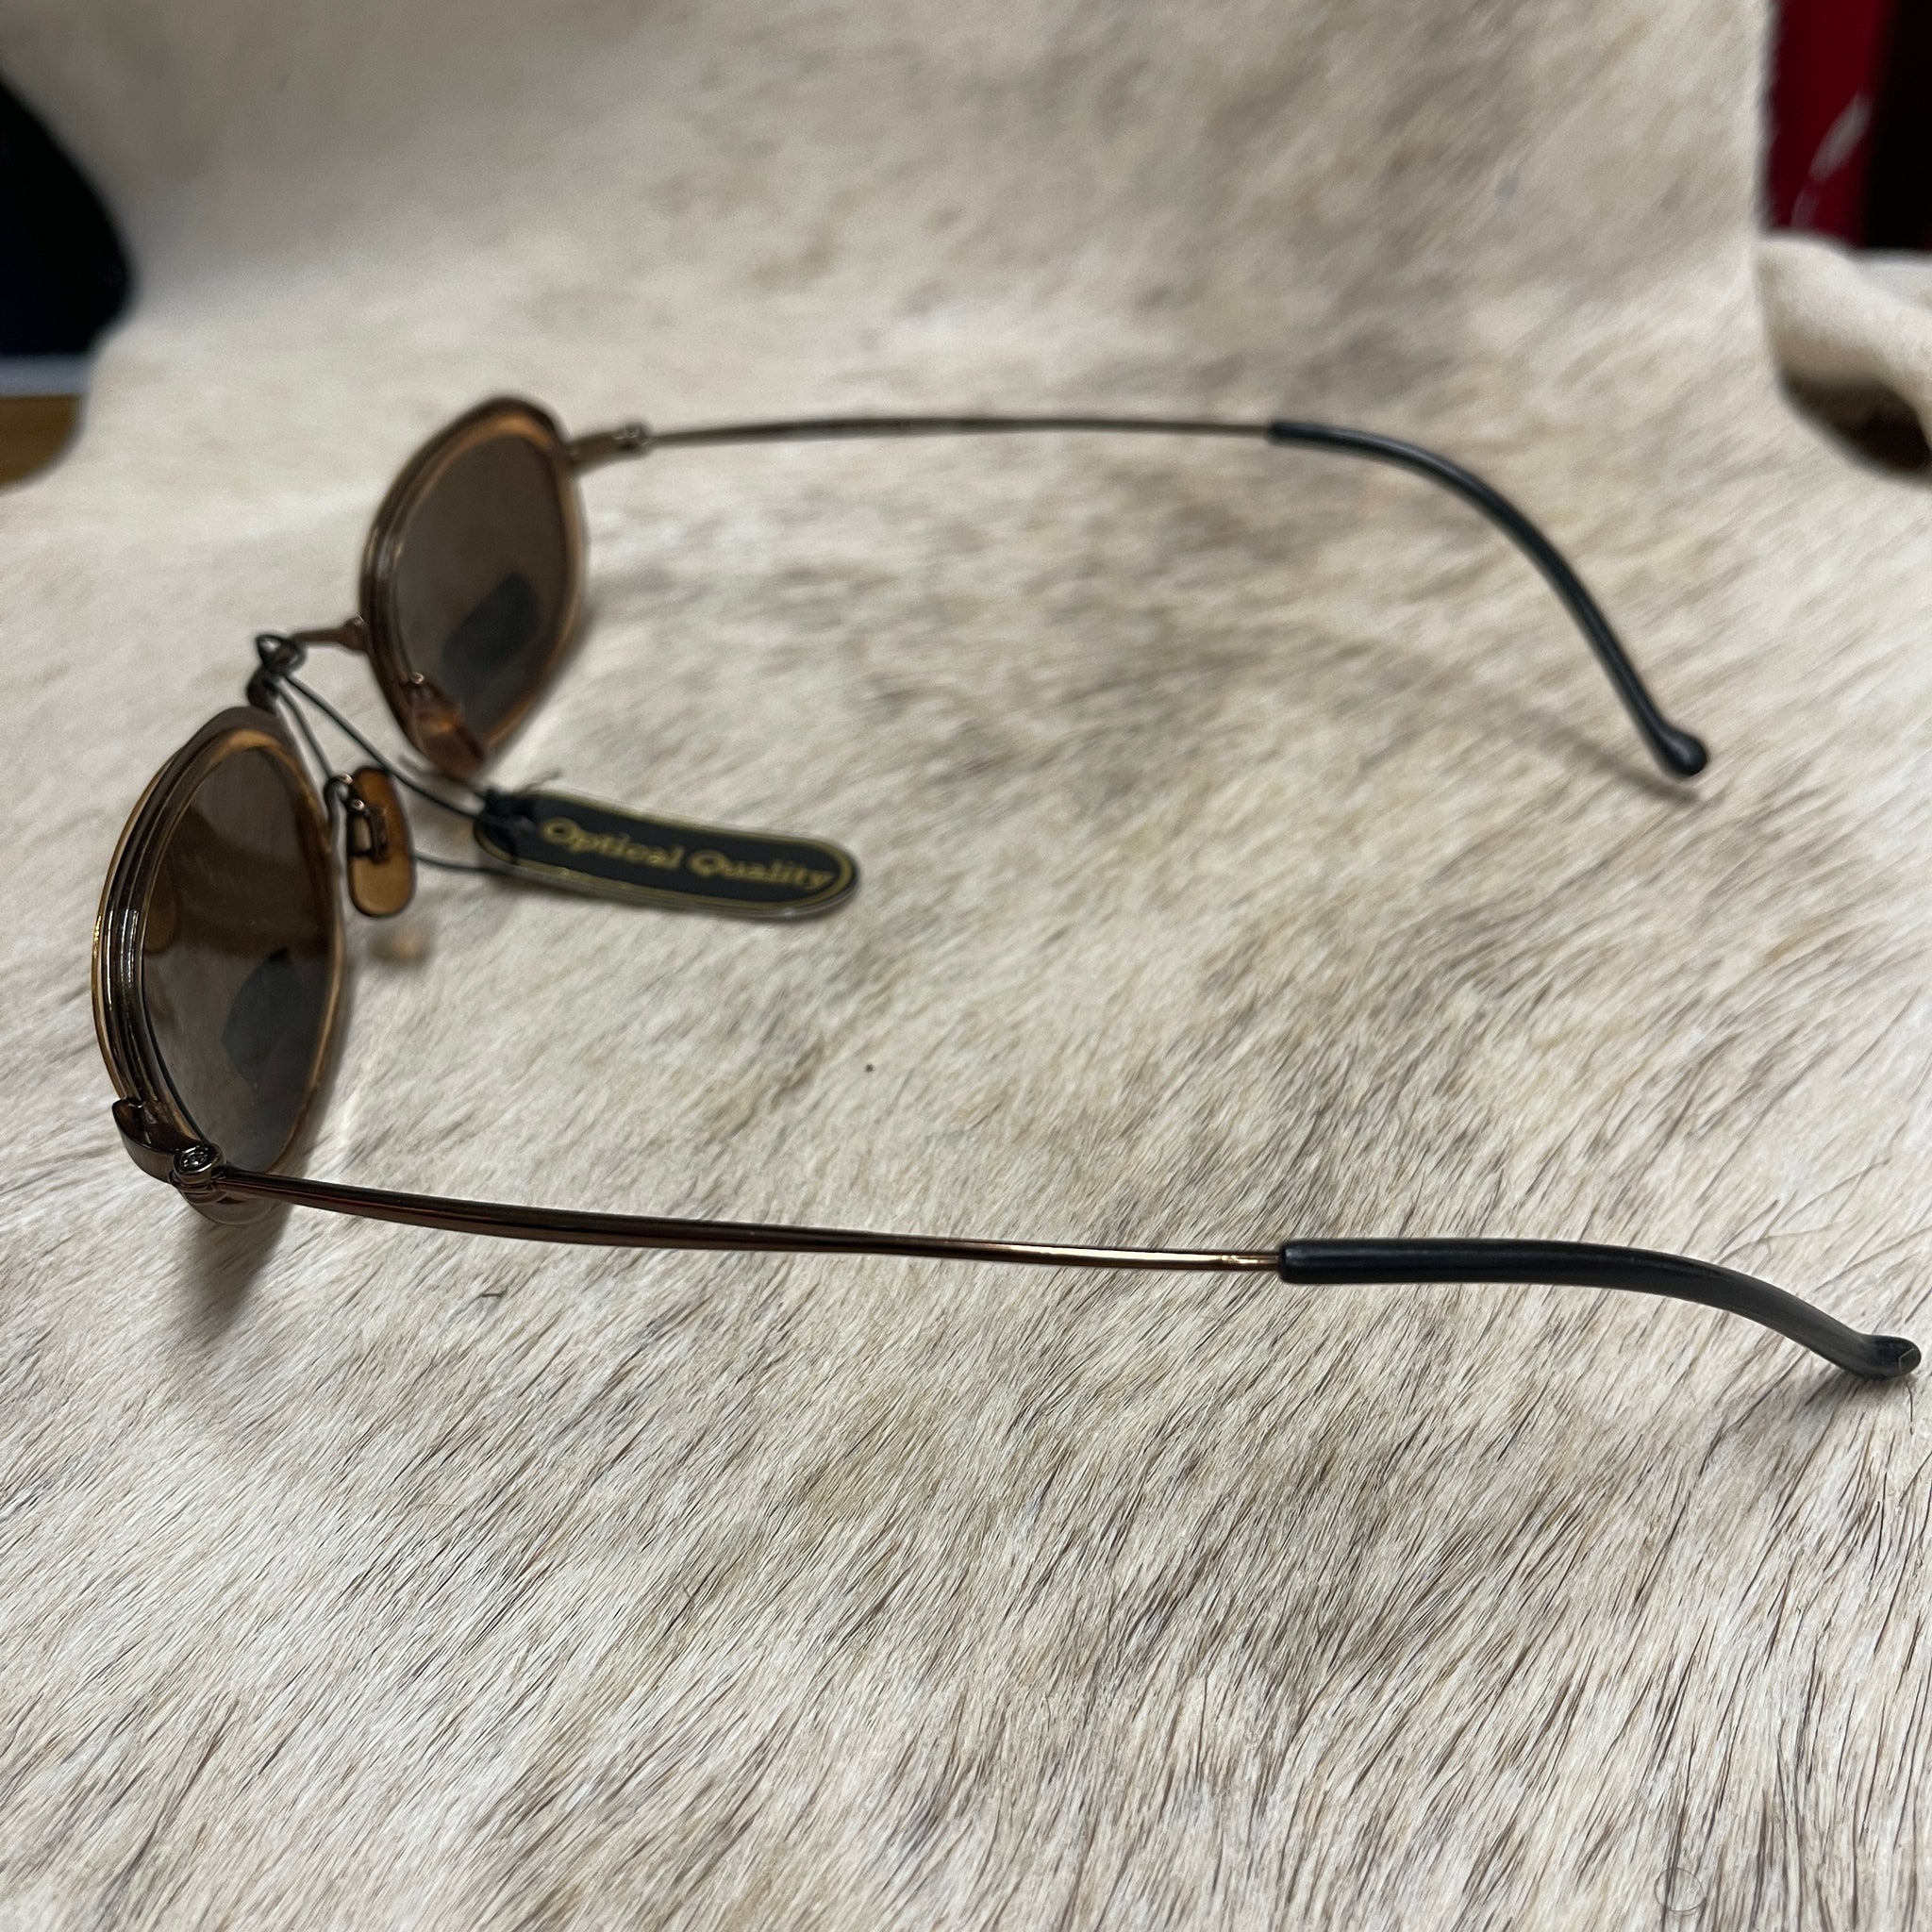 New Old Stock 90s sunglasses